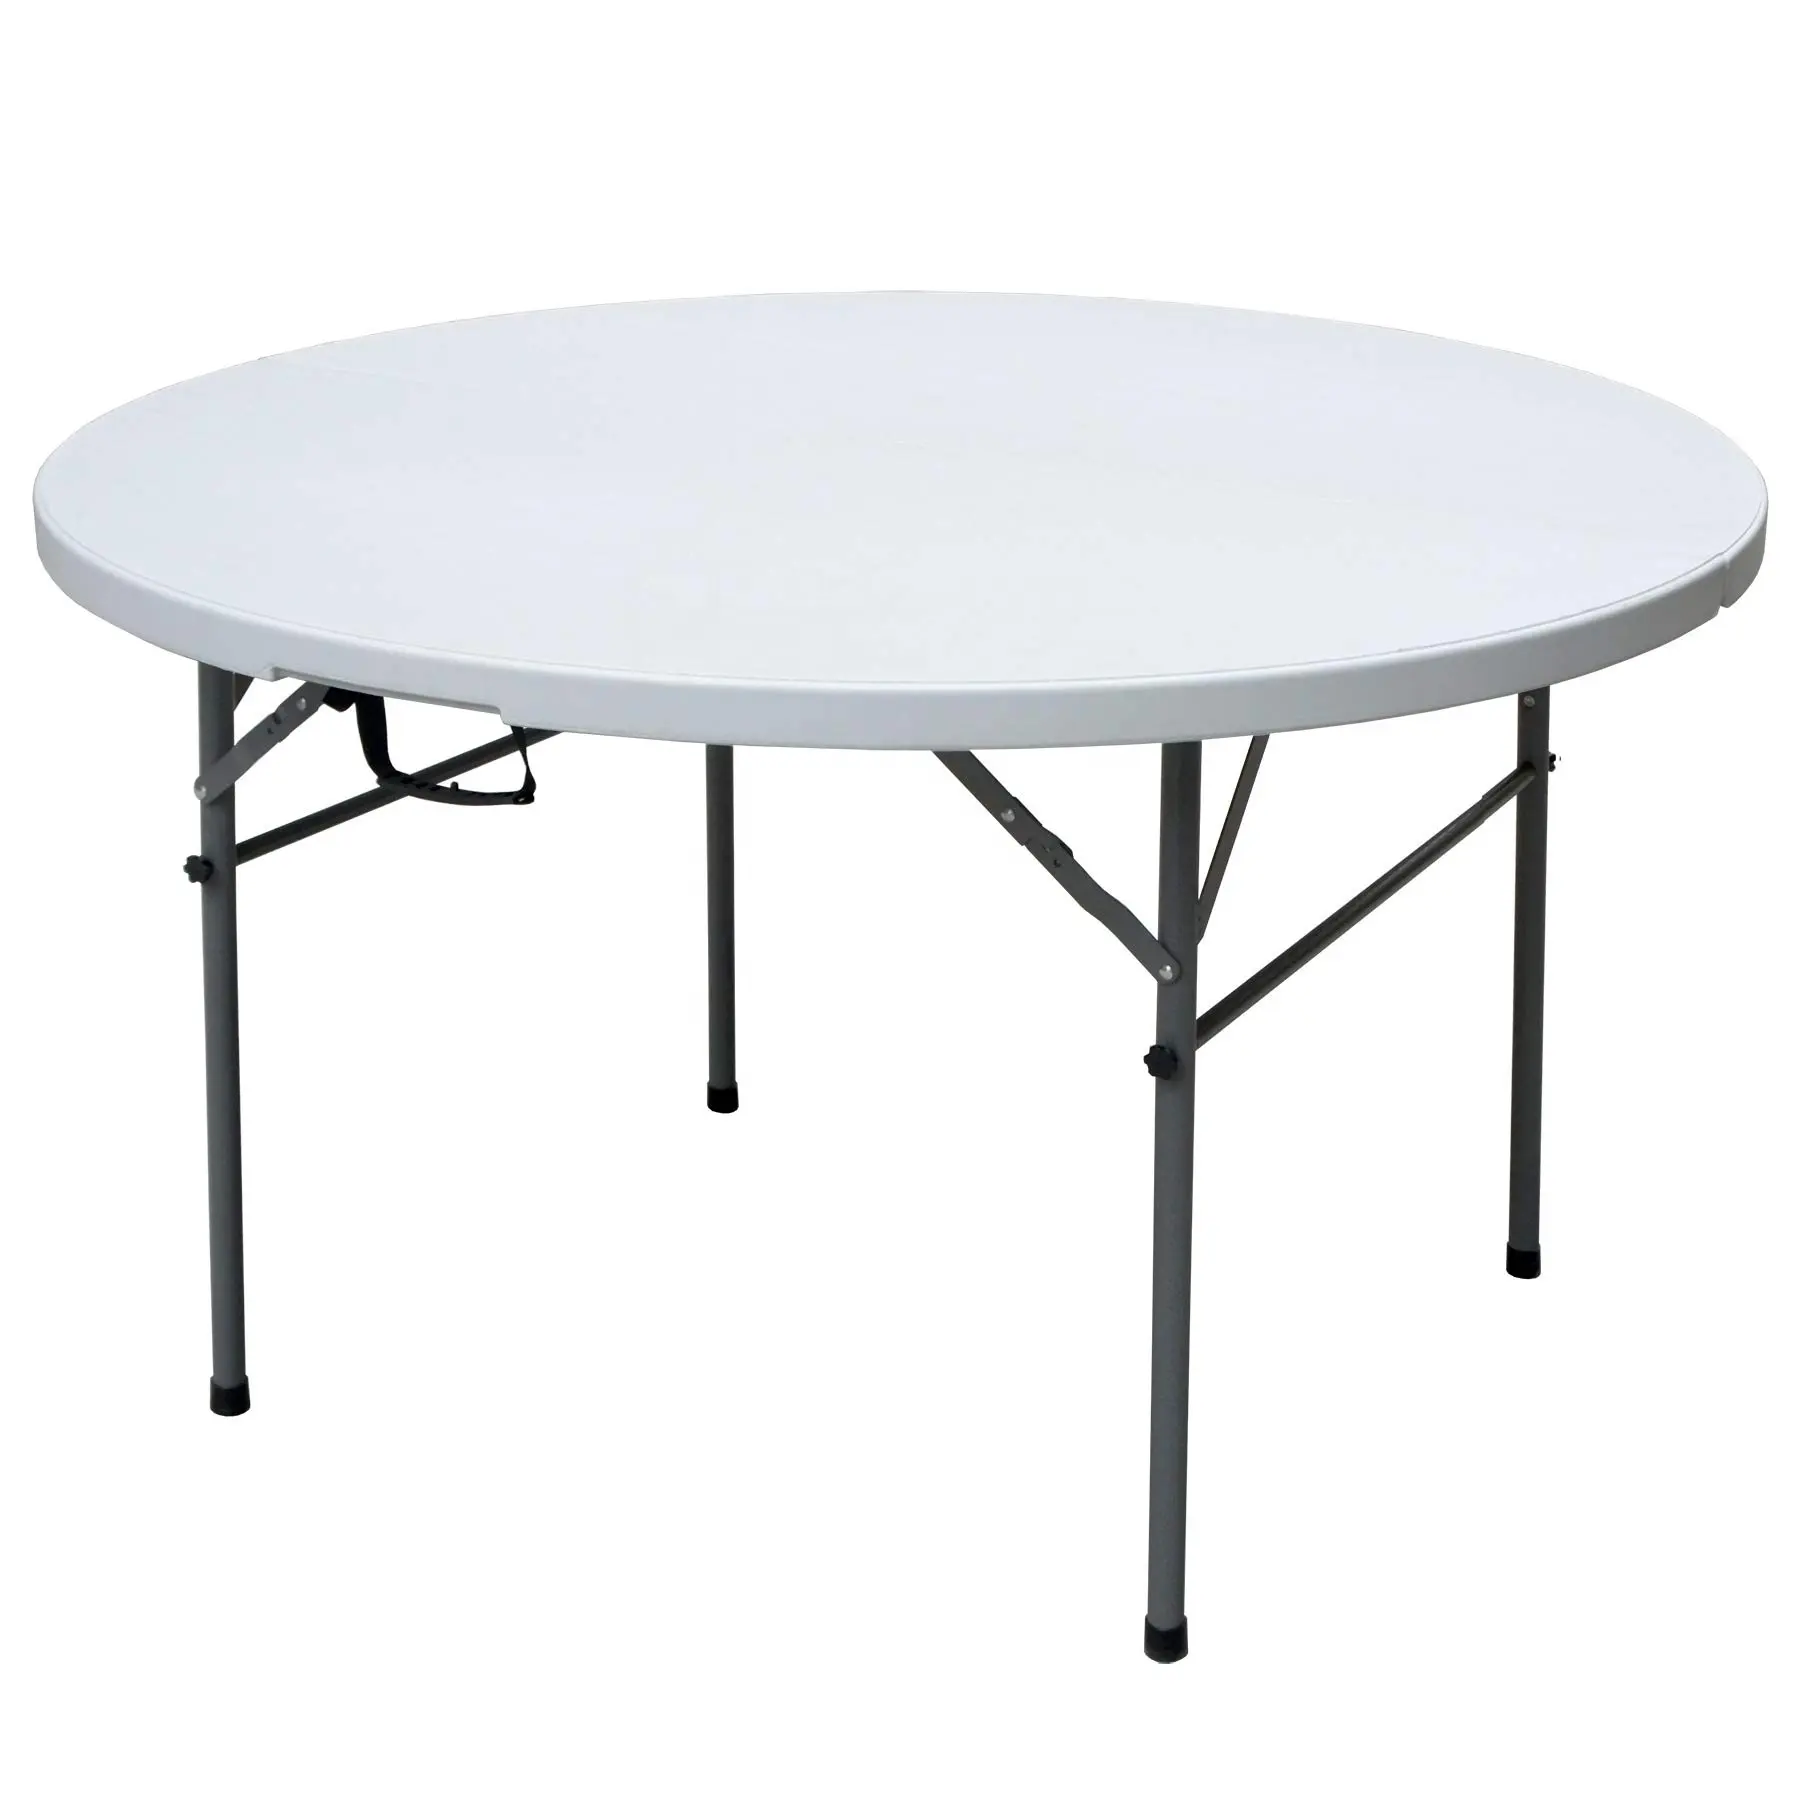 72inch 180cm White Portable able HDPE Blow Molding Folding Plastic Round Table Wedding Party Event Outdoor Dining Table